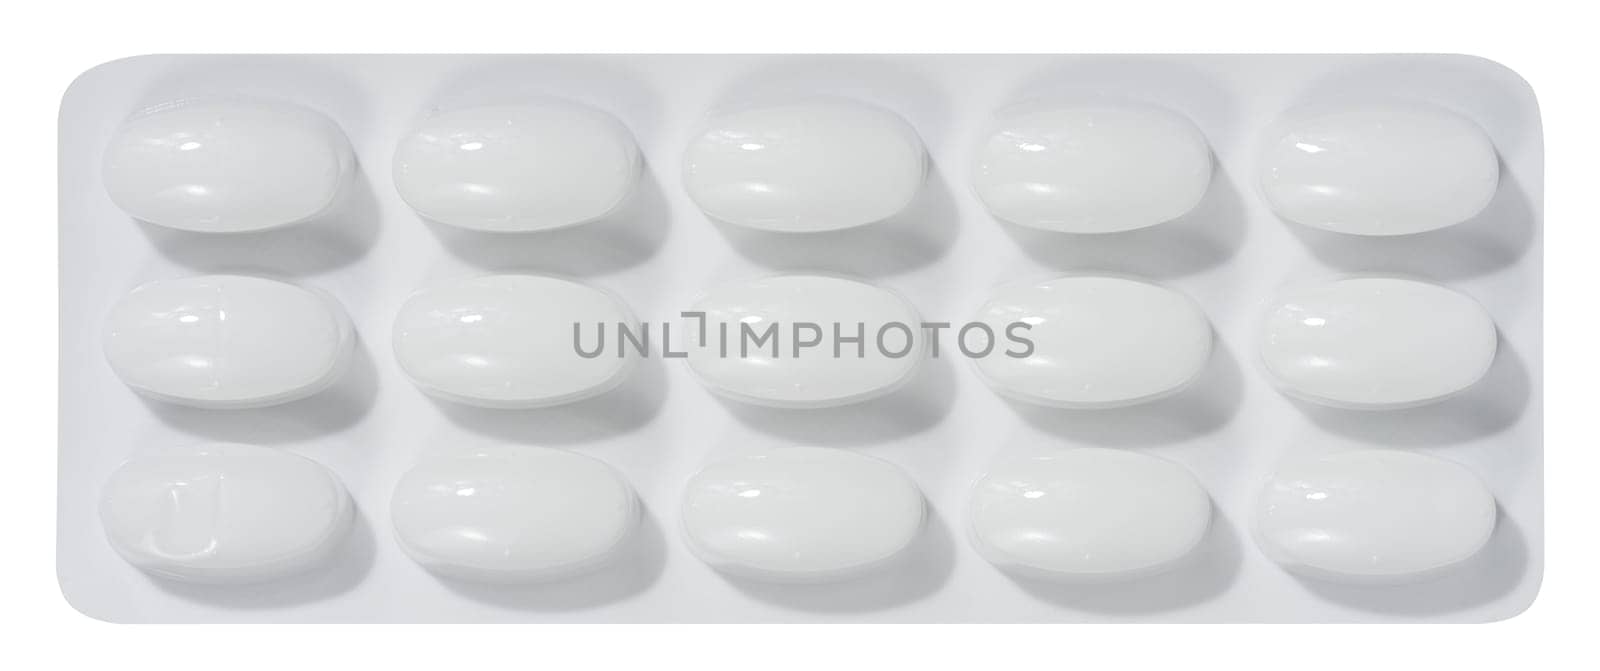 Oval tablets in white plastic packaging, top view by ndanko